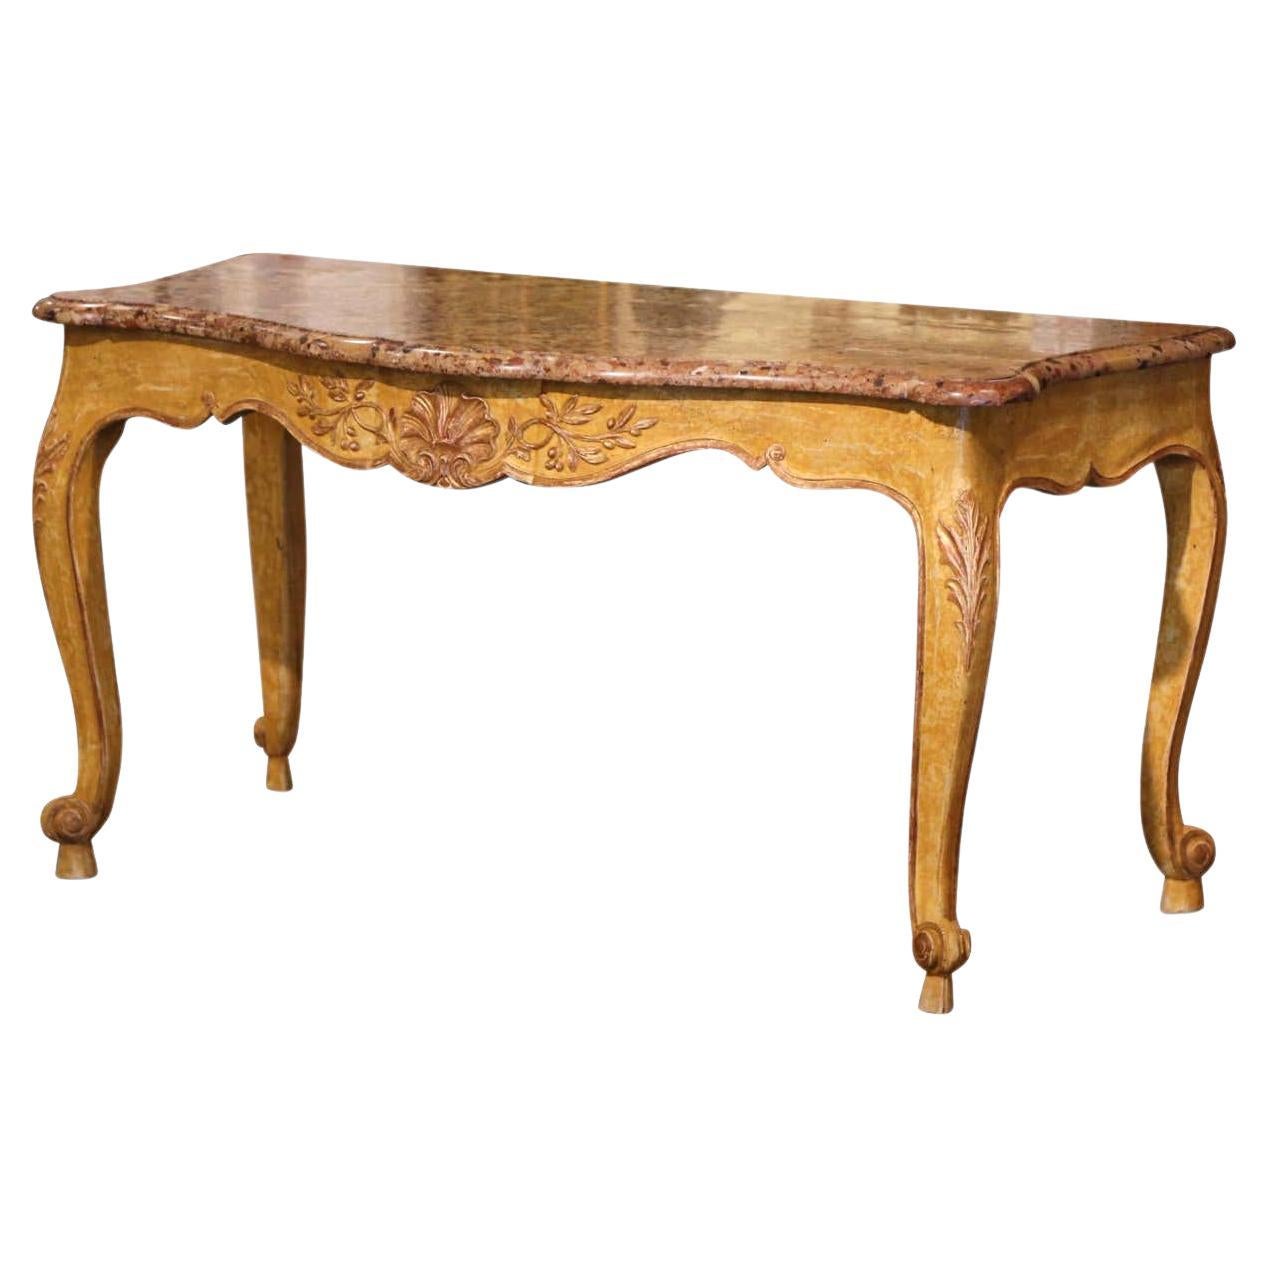 19th Century French Louis XV Provencal Marble Top Carved Painted Console Table  For Sale